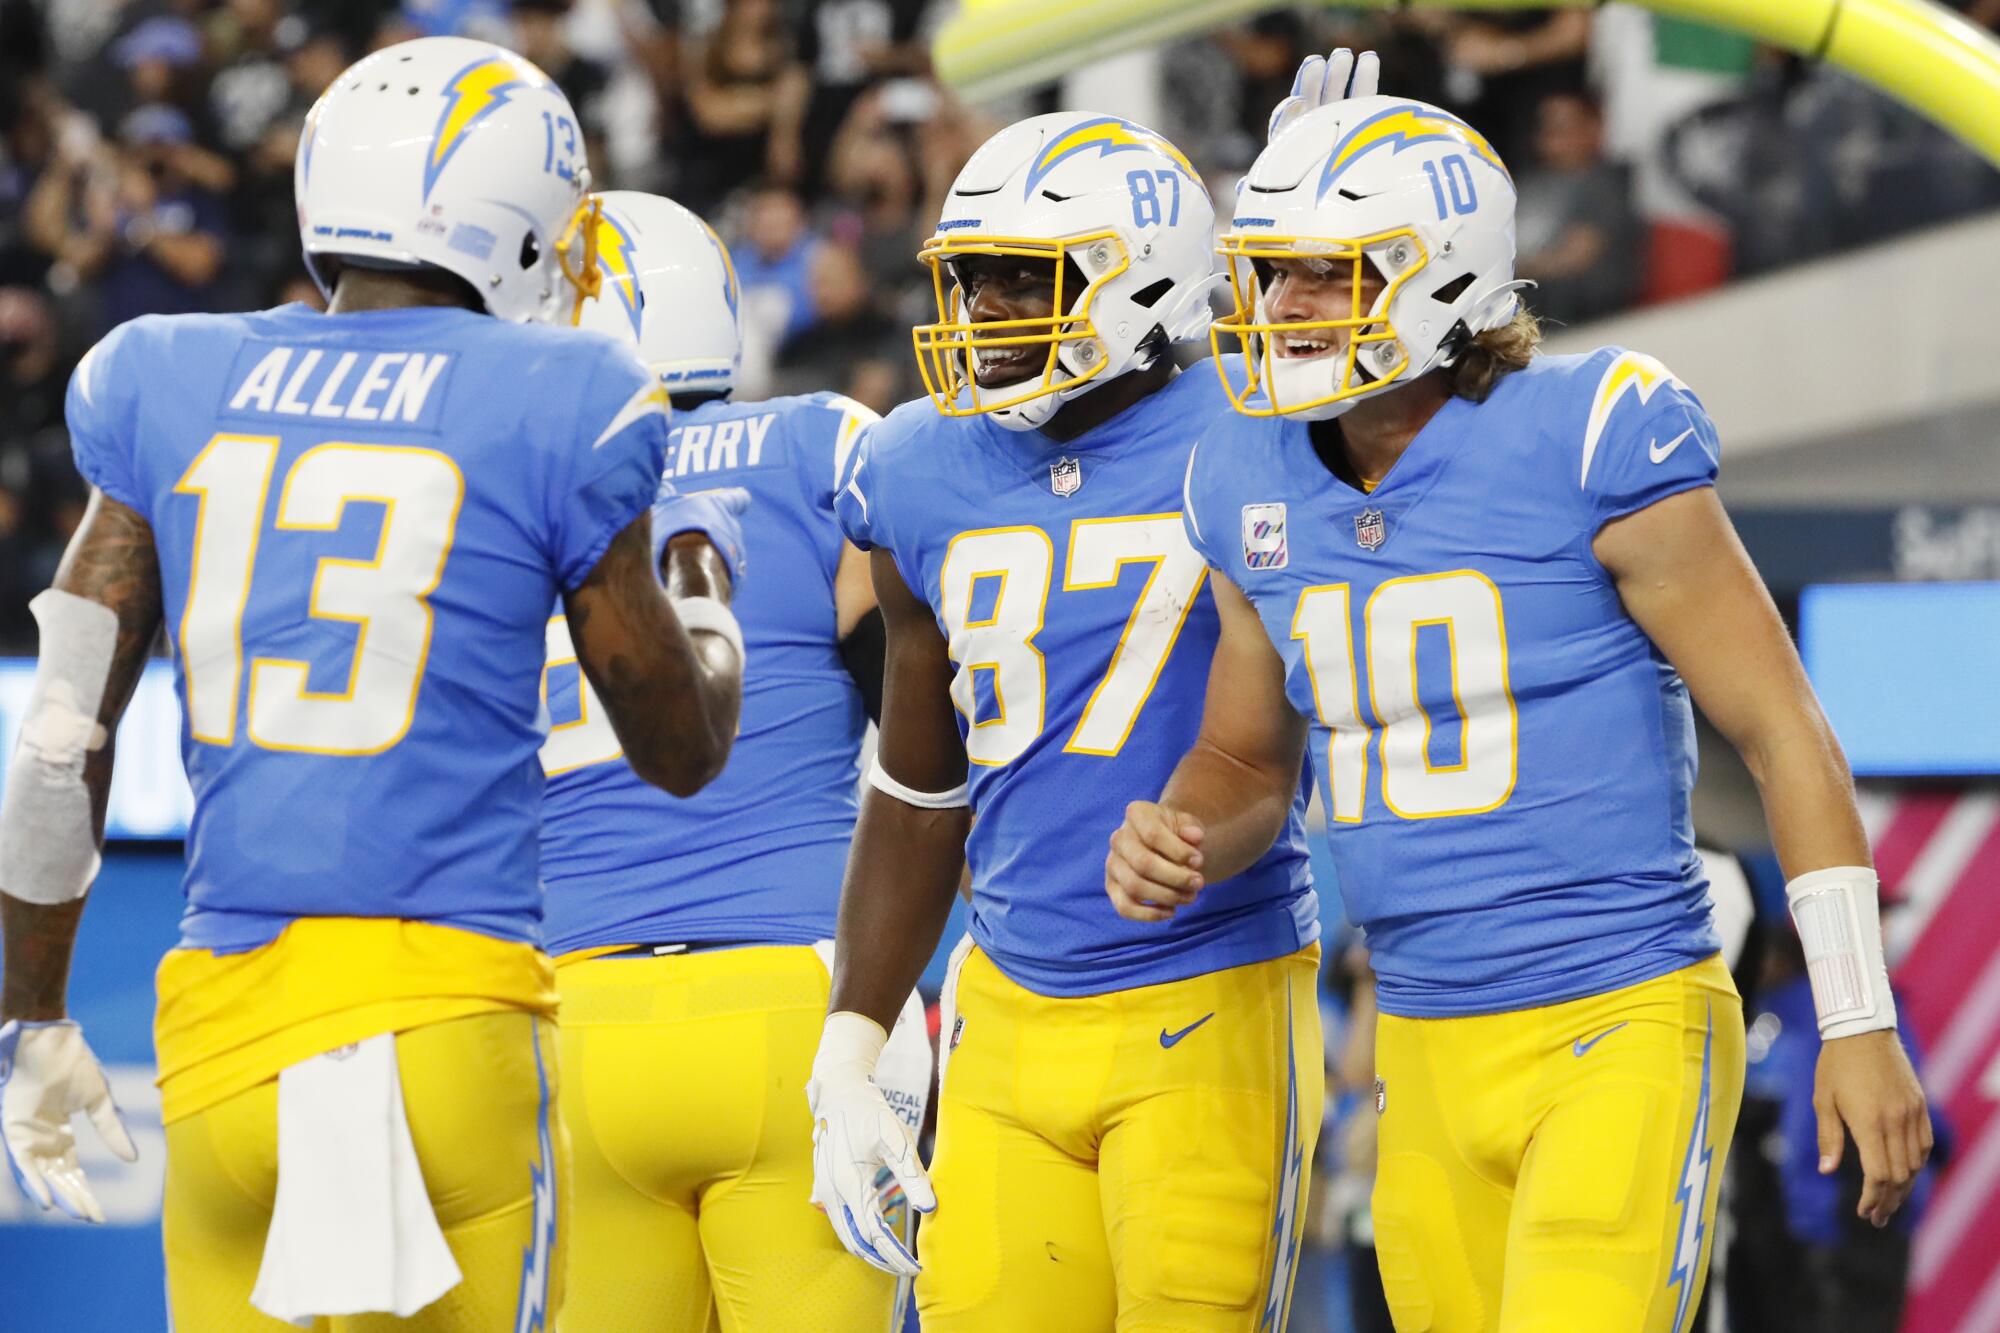 Chargers quarterback Justin Herbert celebrates with teammates after throwing a touchdown pass to tight end Jared Cook.